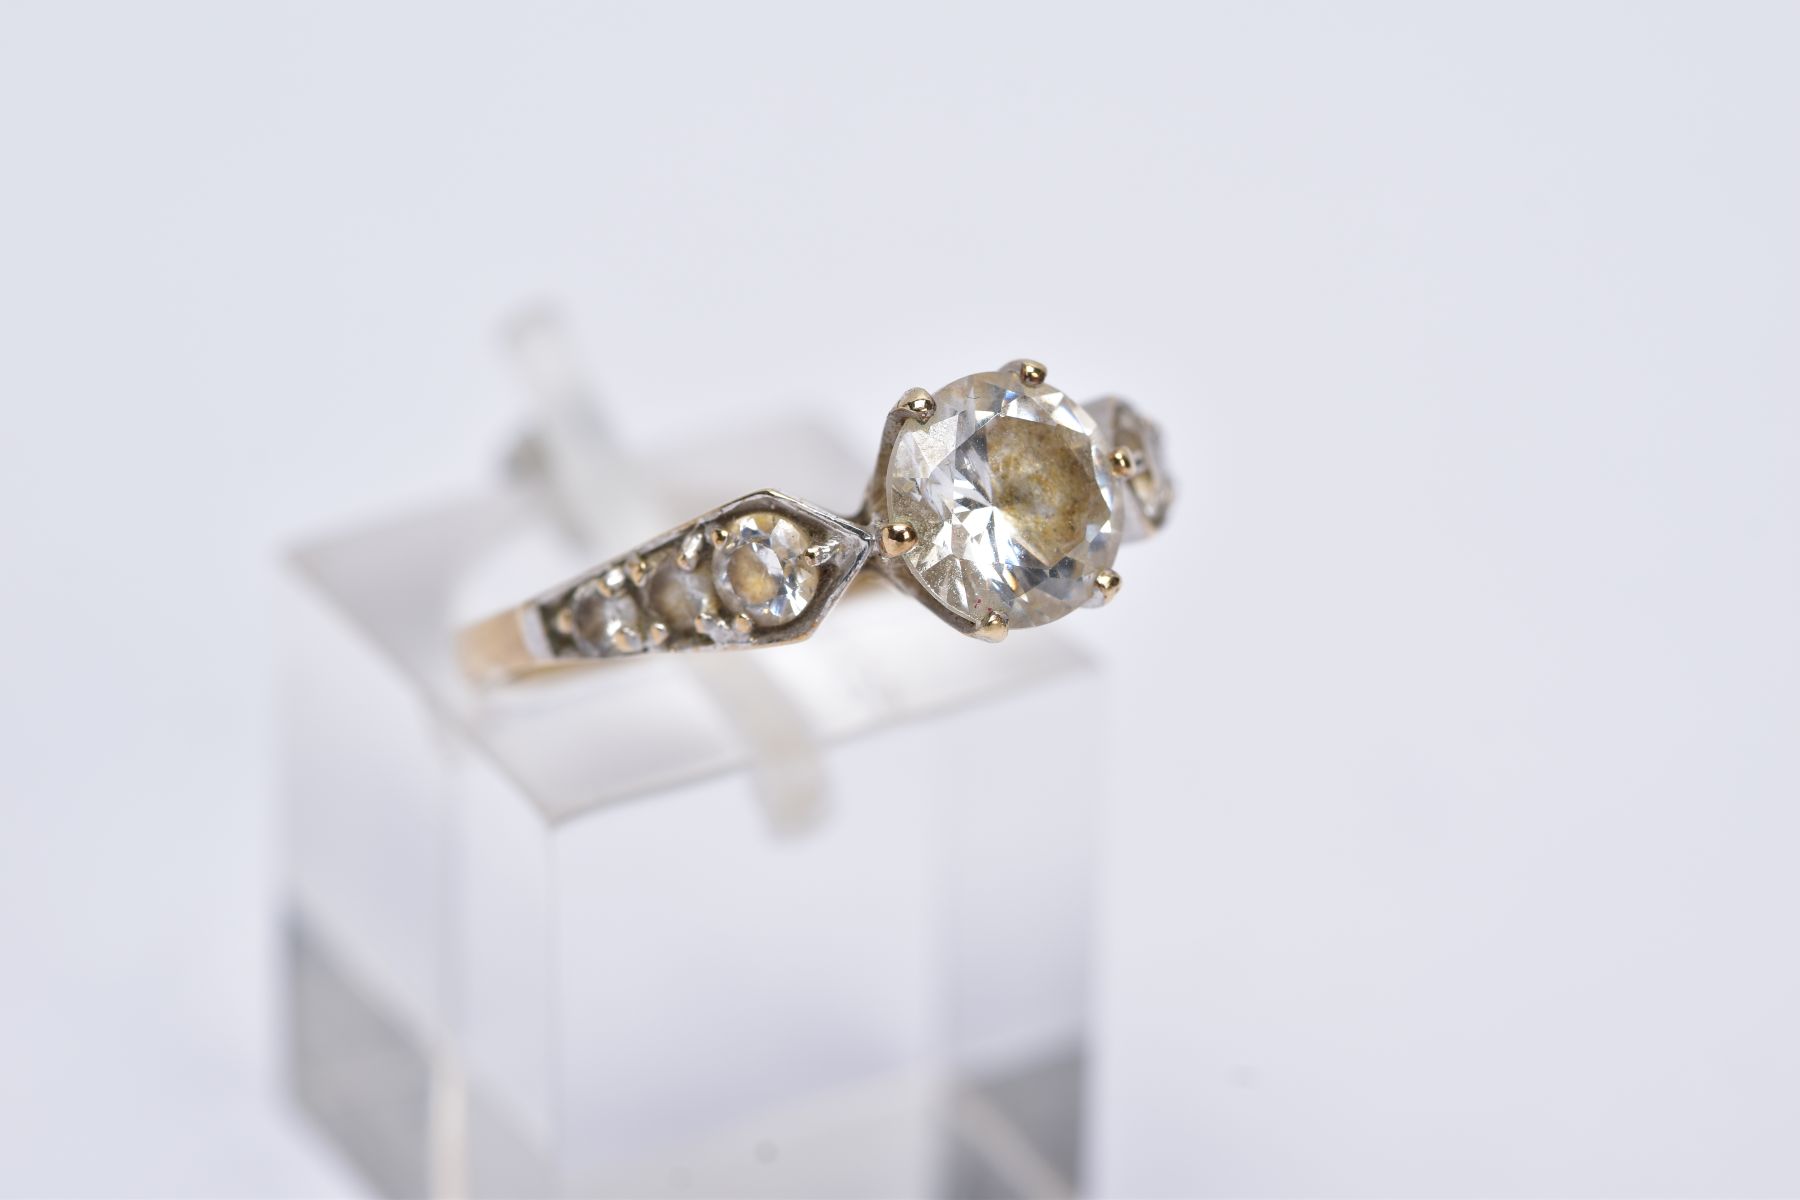 A 9CT GOLD CUBIC ZIRCONIA DRESS RING, ring size N, hallmarked 9ct gold, approximate gross weight 2.9 - Image 4 of 4